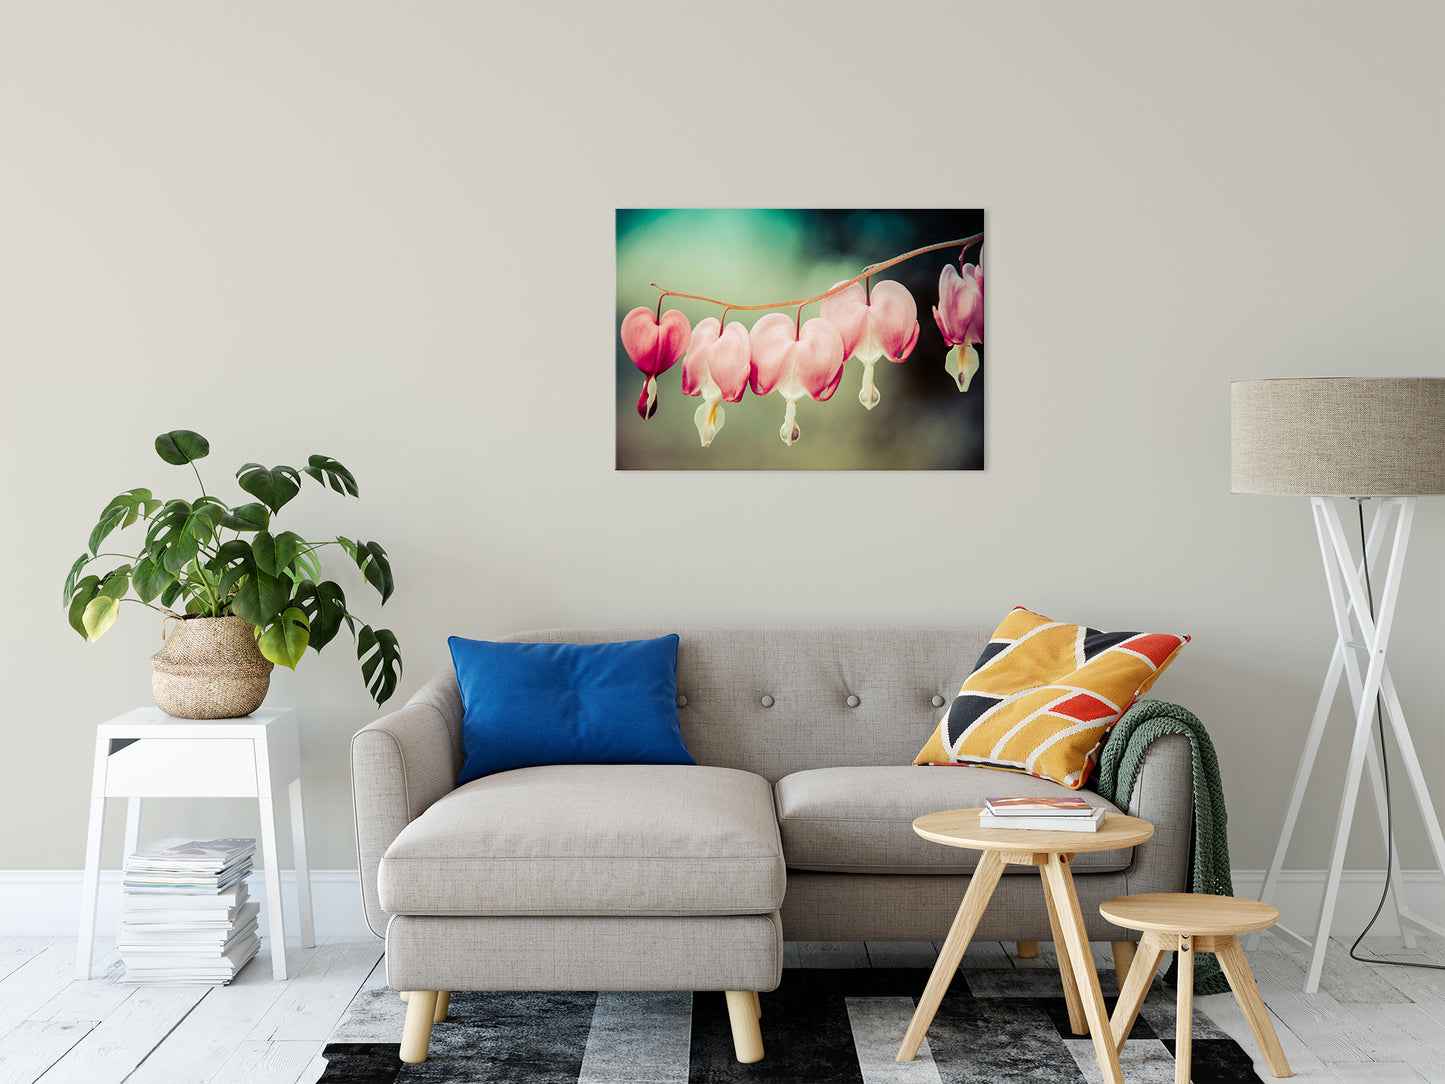 Panel Wall Art: Be Still My Bleeding Heart Colorized Nature / Floral Photo Fine Art Canvas Wall Art Prints 24" x 36" - PIPAFINEART